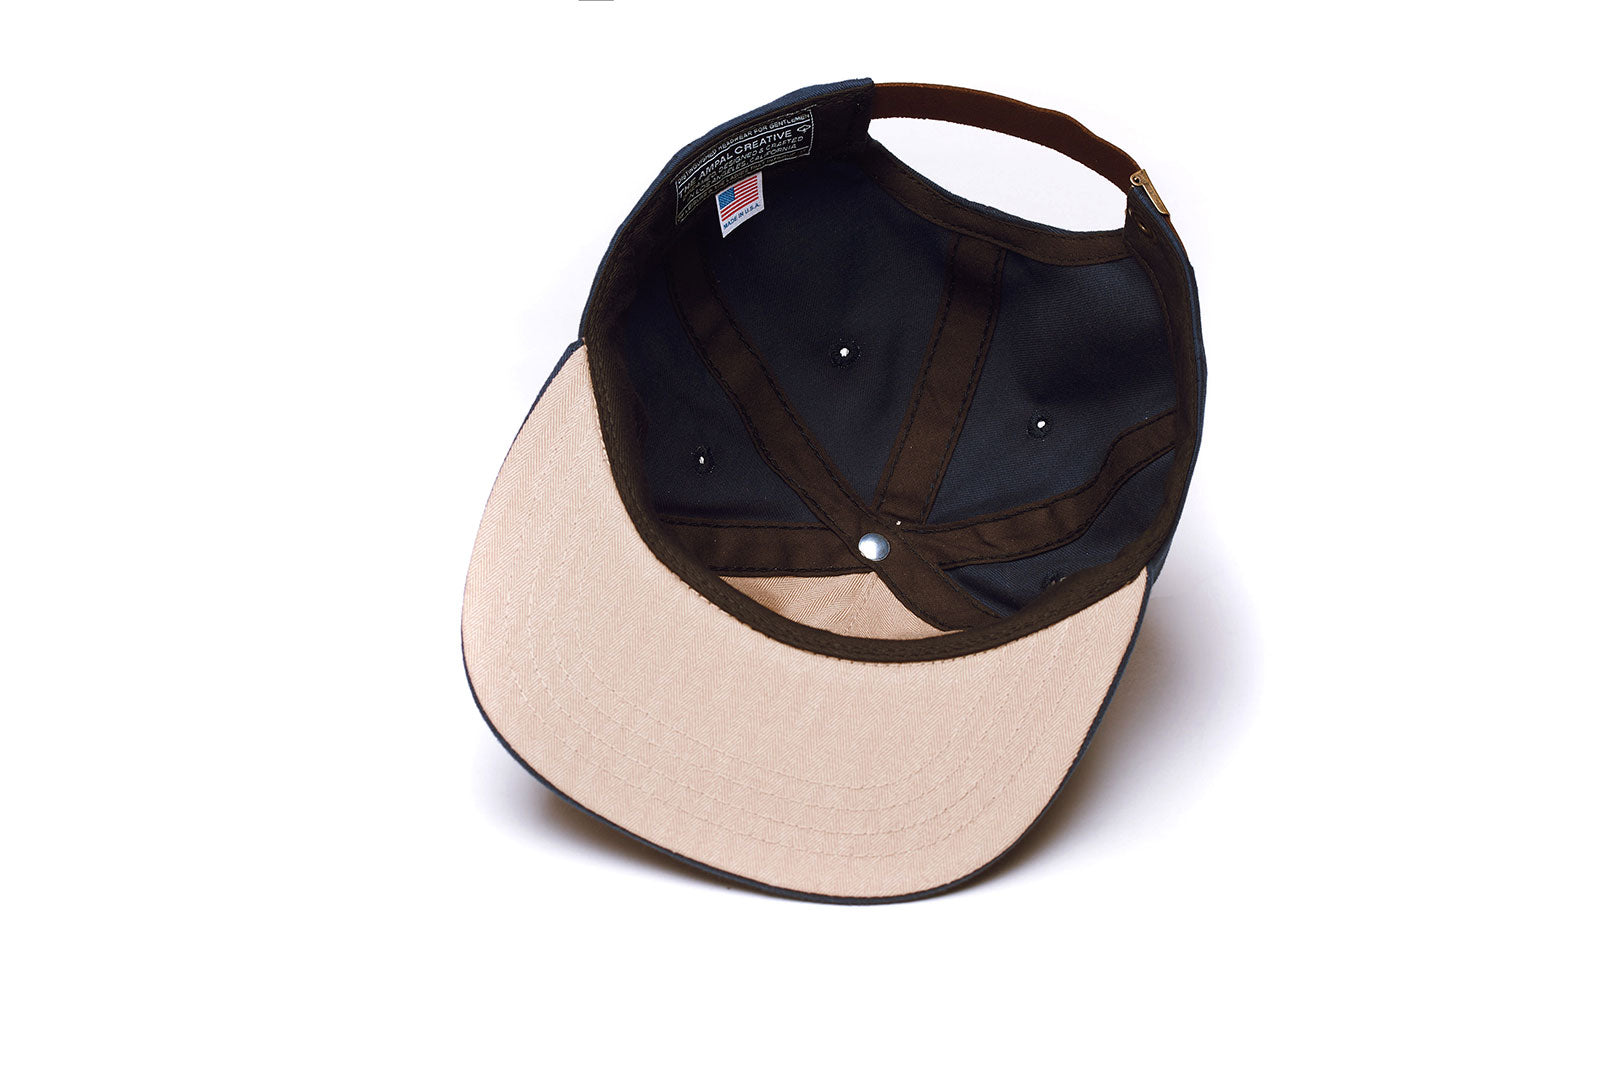 PACIFIC Pennant Strapback